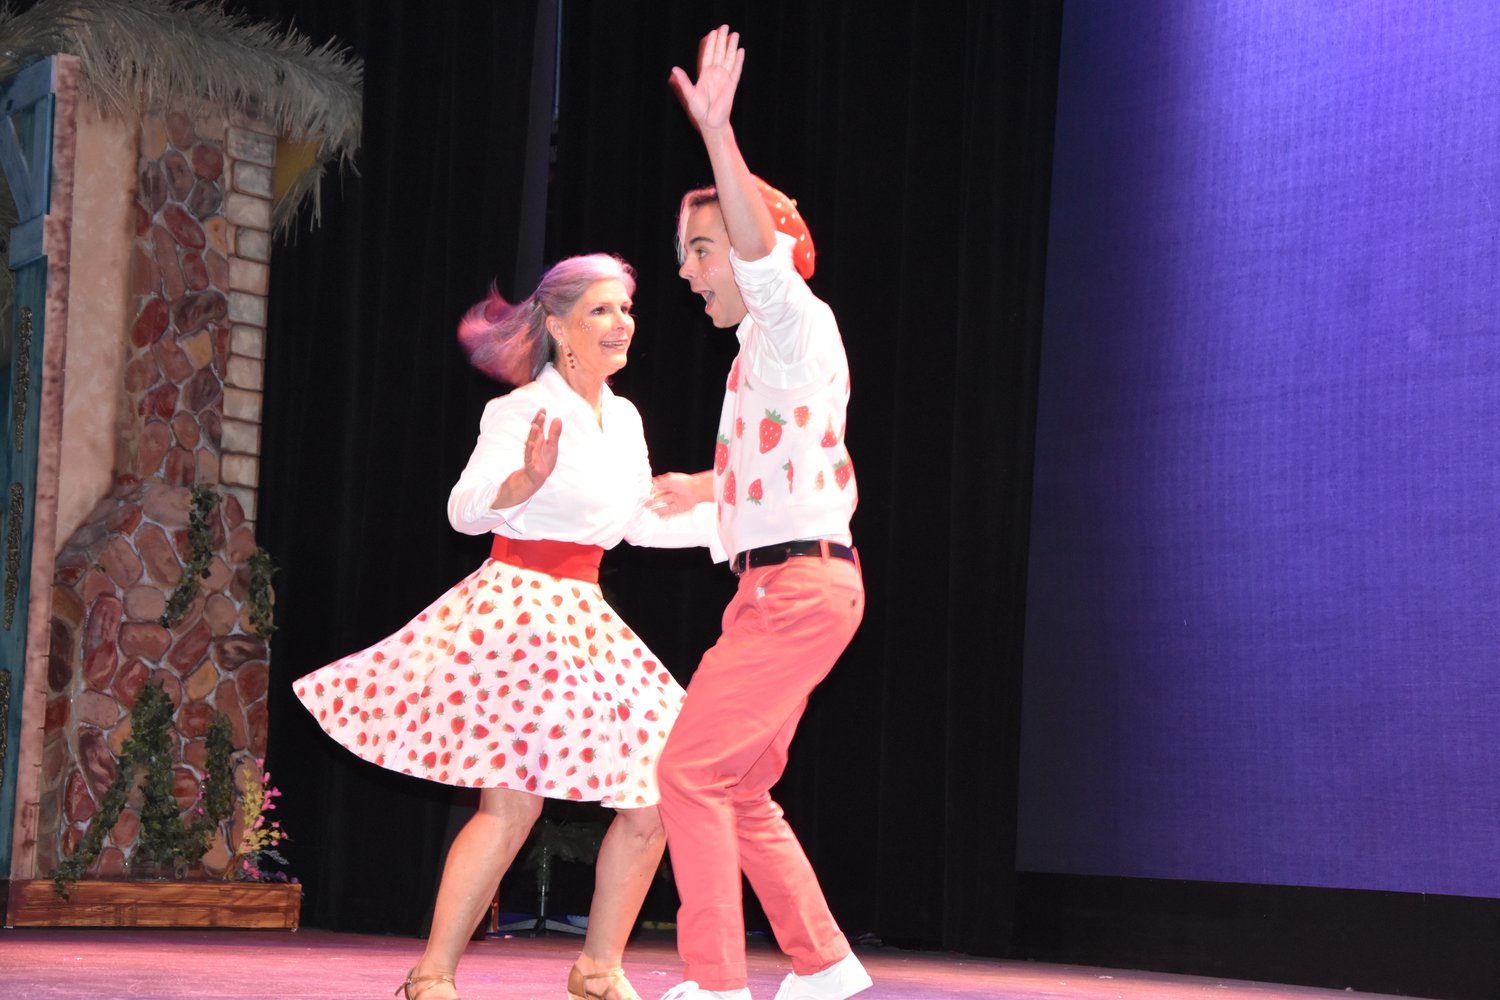 Fort Lupton's Kelley Jackson won best performance for Lindy Hop with her dance partner Todd Teter with Colorado Dance Collective.